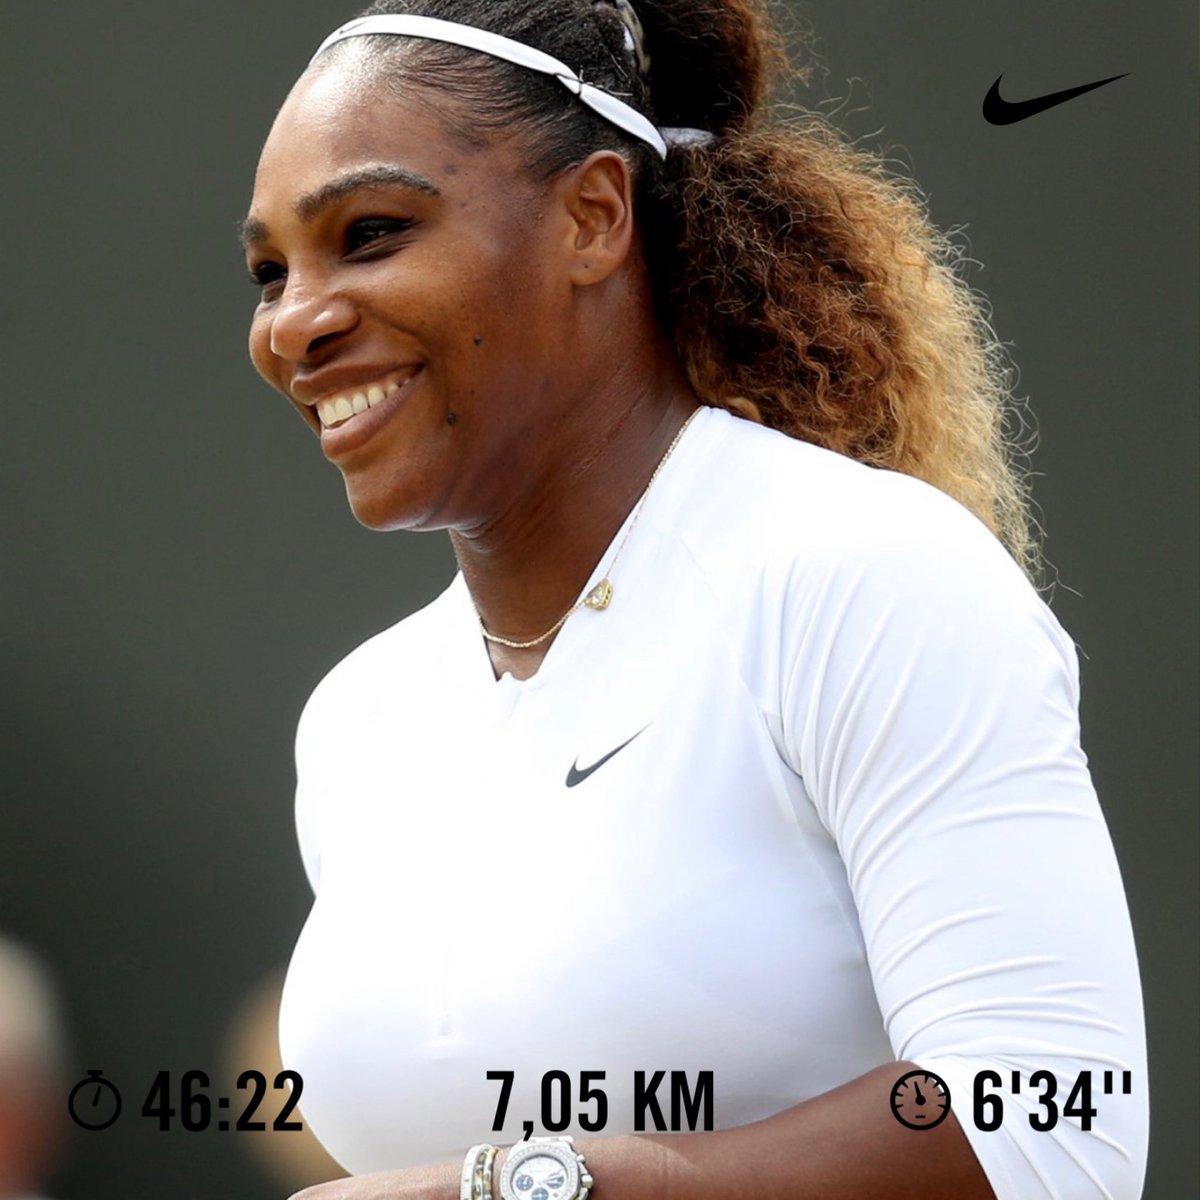 The queen is back #SerenaWilliams👑
#Wimbledon2022 
#GrassSeason
My morning session 🍓
#IPaintedMyRun 
#FetchYourBody2022 
#RunningWithTumiSole 